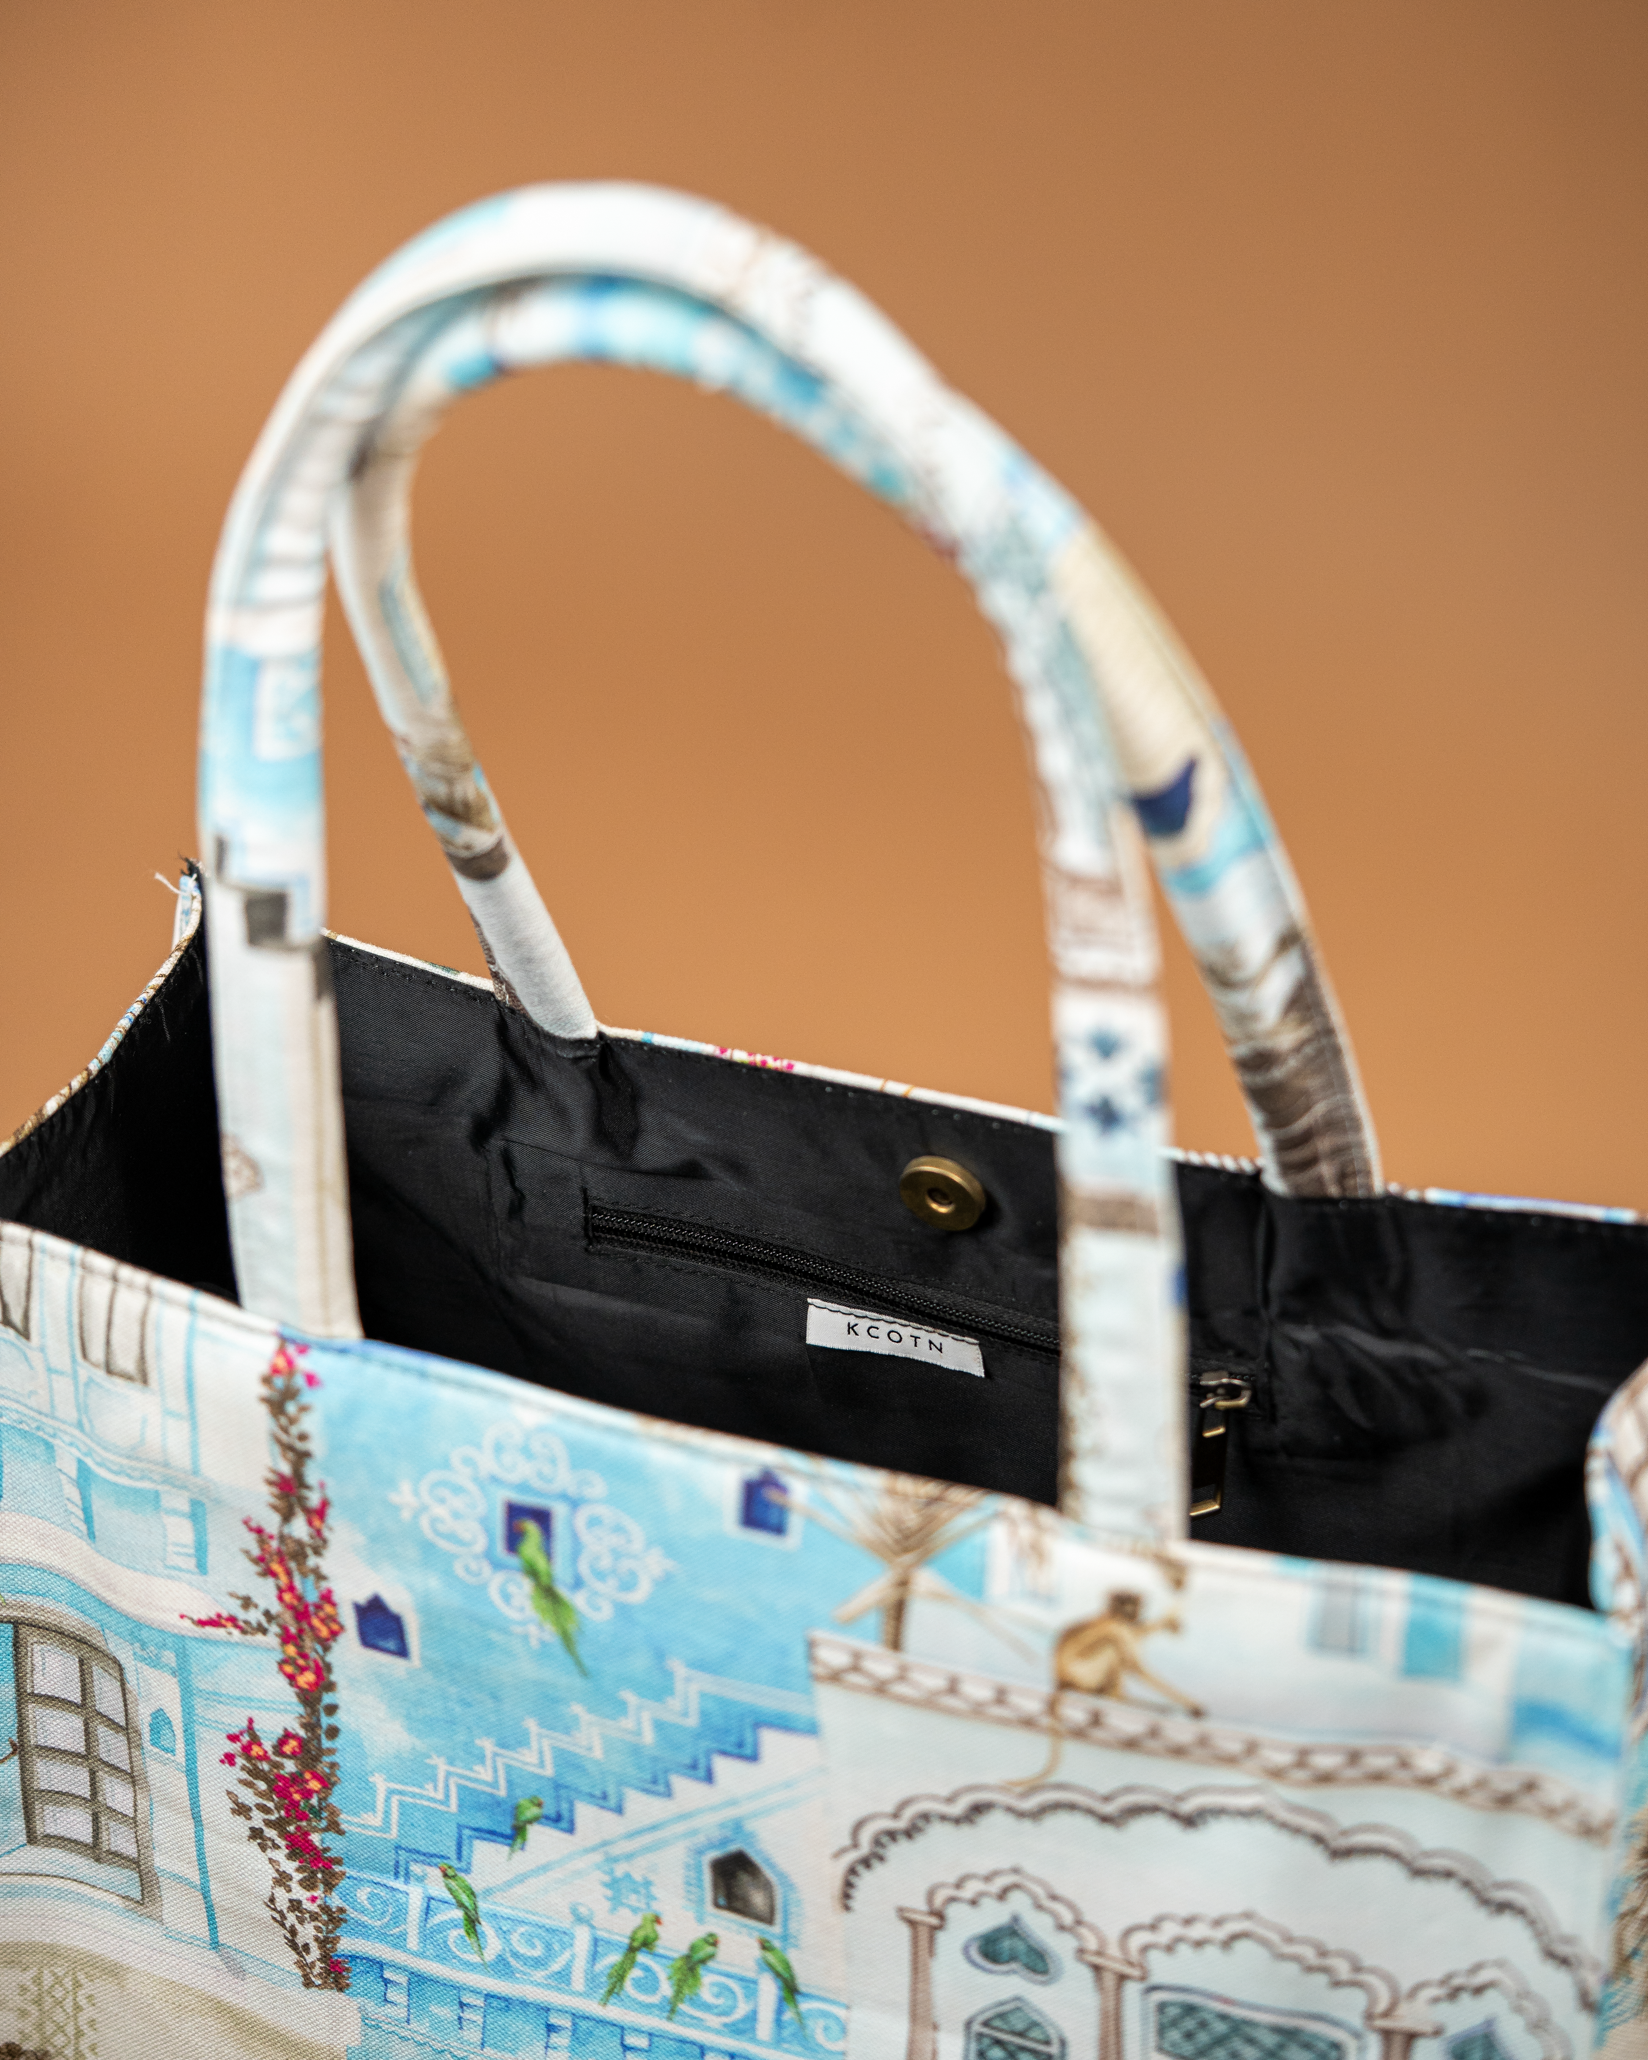 Ranisthan Blue City Tote